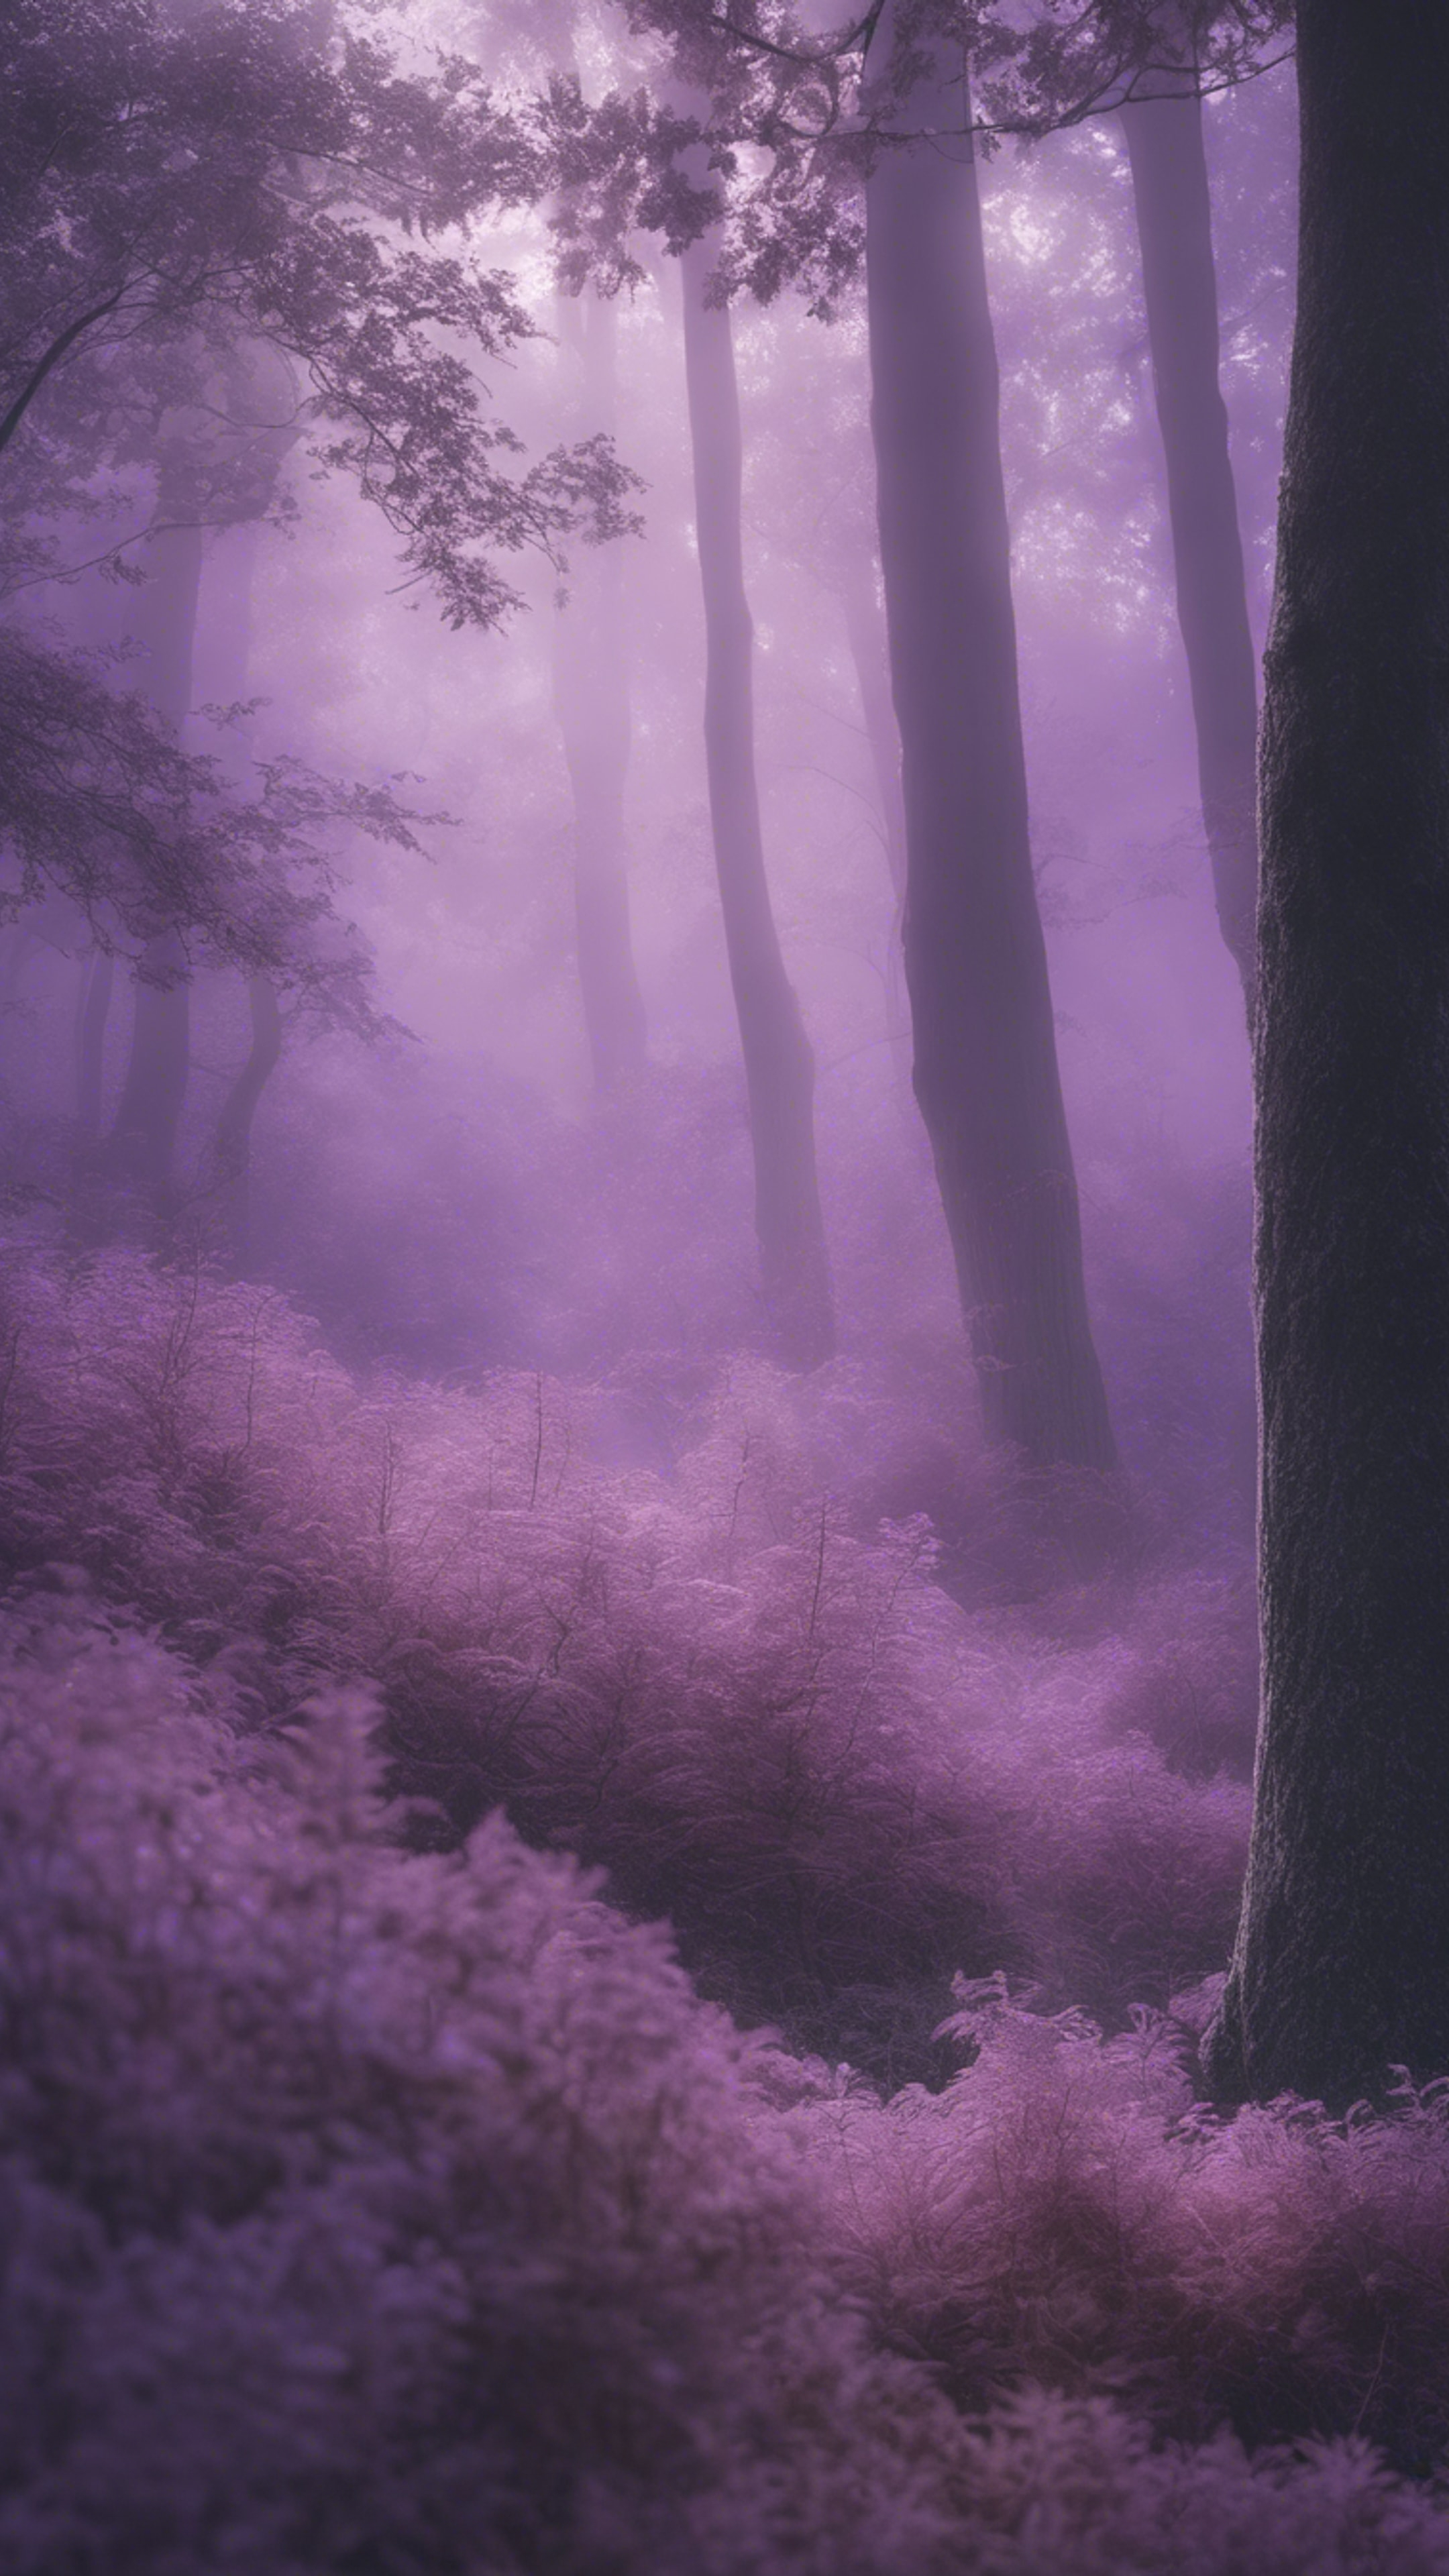 Ethereal scene of a tranquil forest bowed under a silky layer of light purple fog. Tapeta[581b7126aa2a4d368dd8]